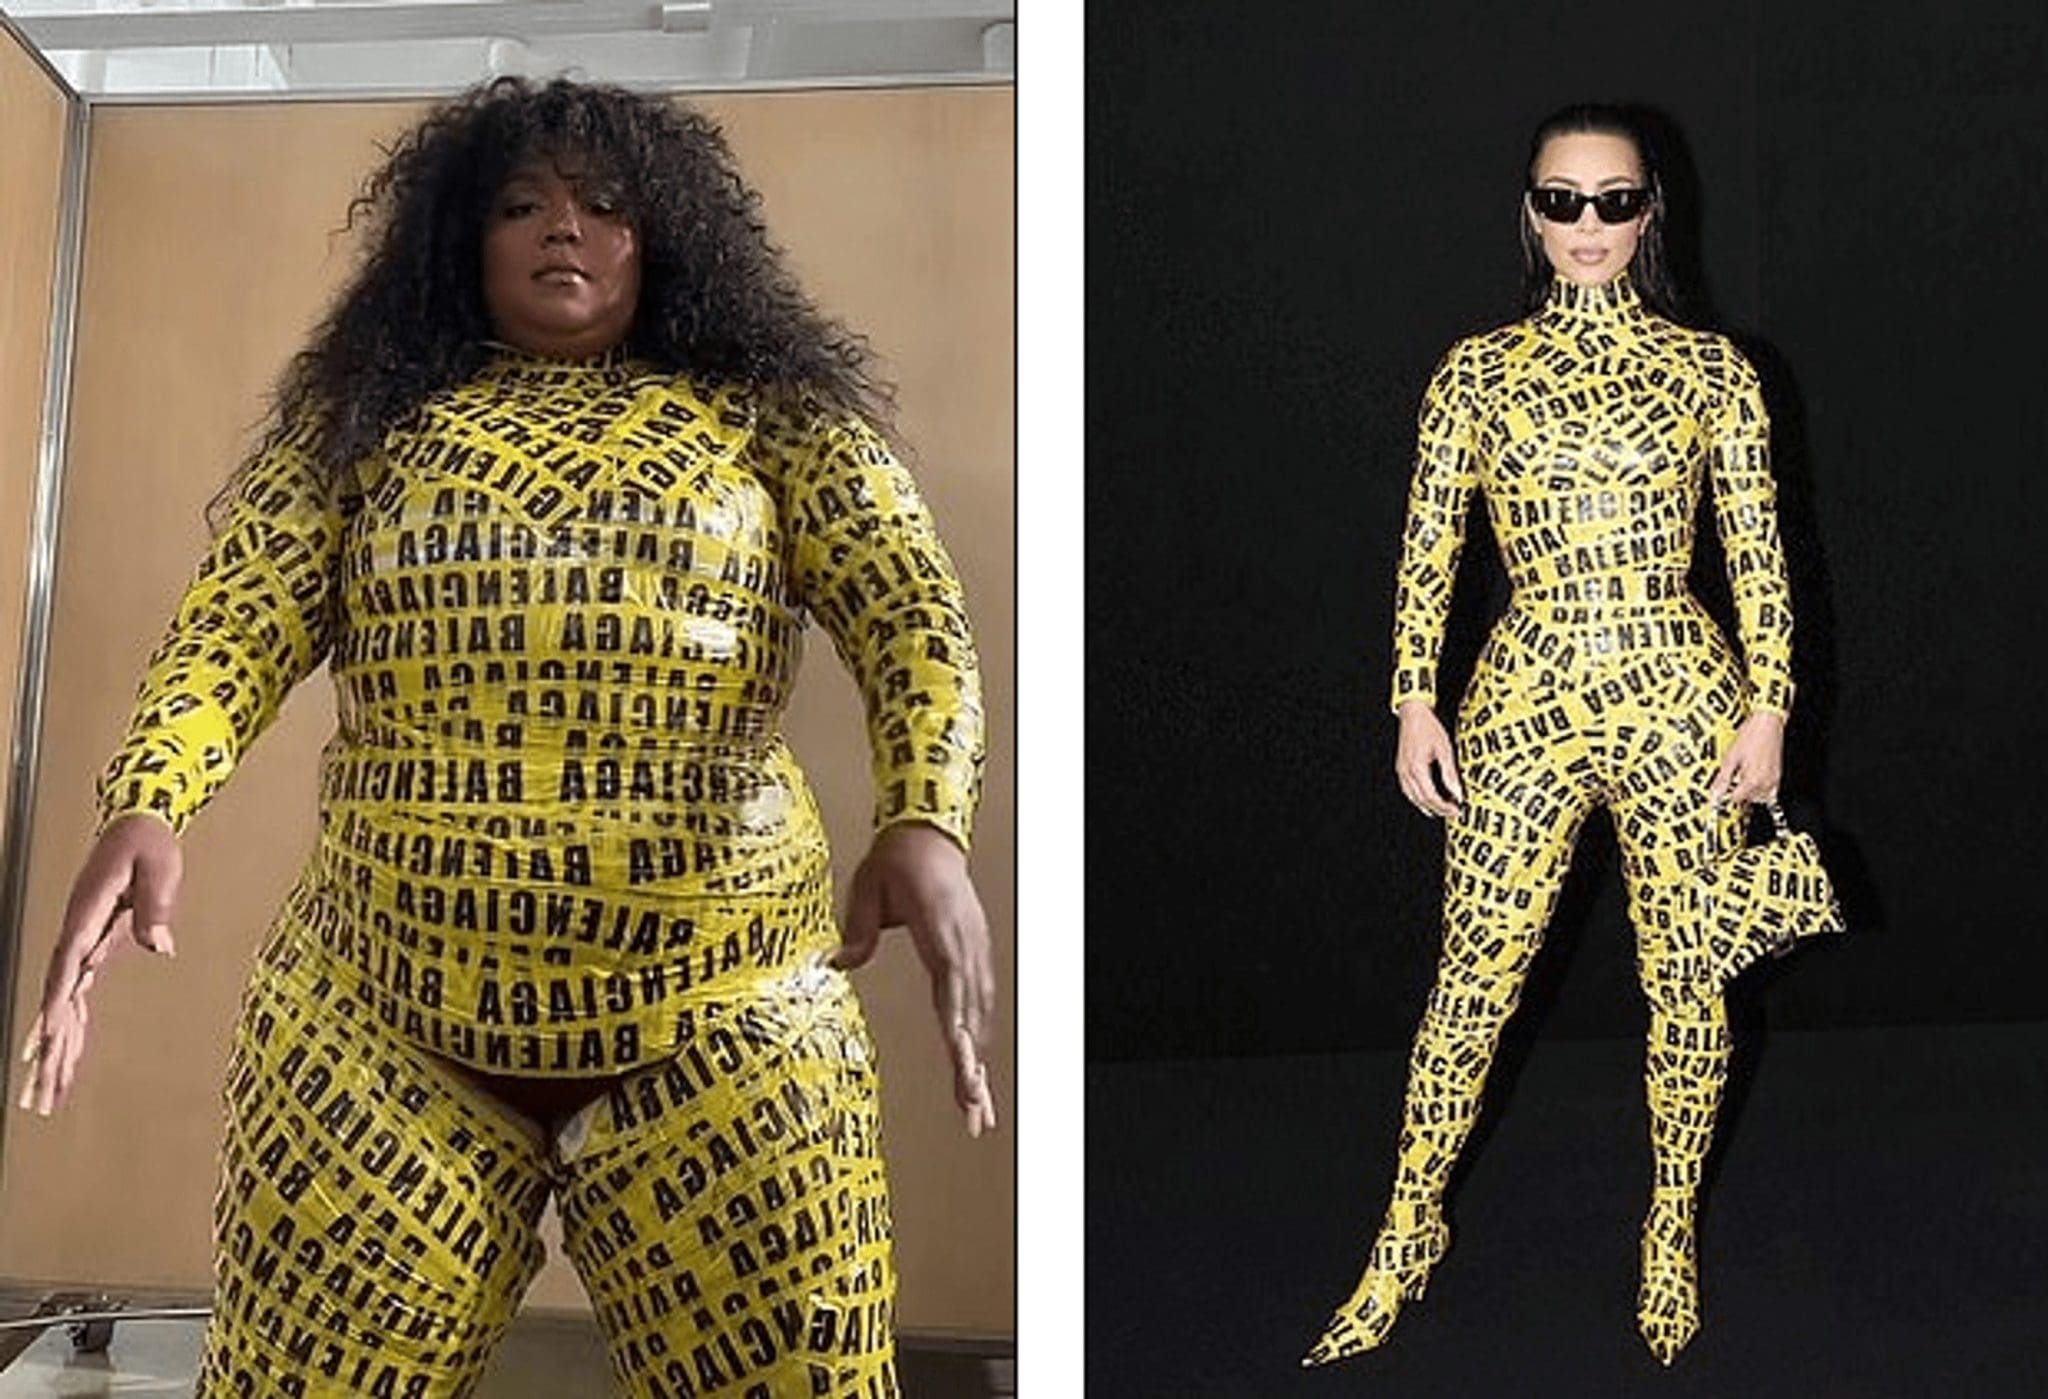 Lizzo Released A Humorous Video With Her Fans Wearing A Balenciaga-Branded Outfit She Had Worn For A Recent Gloss Photo Shoot